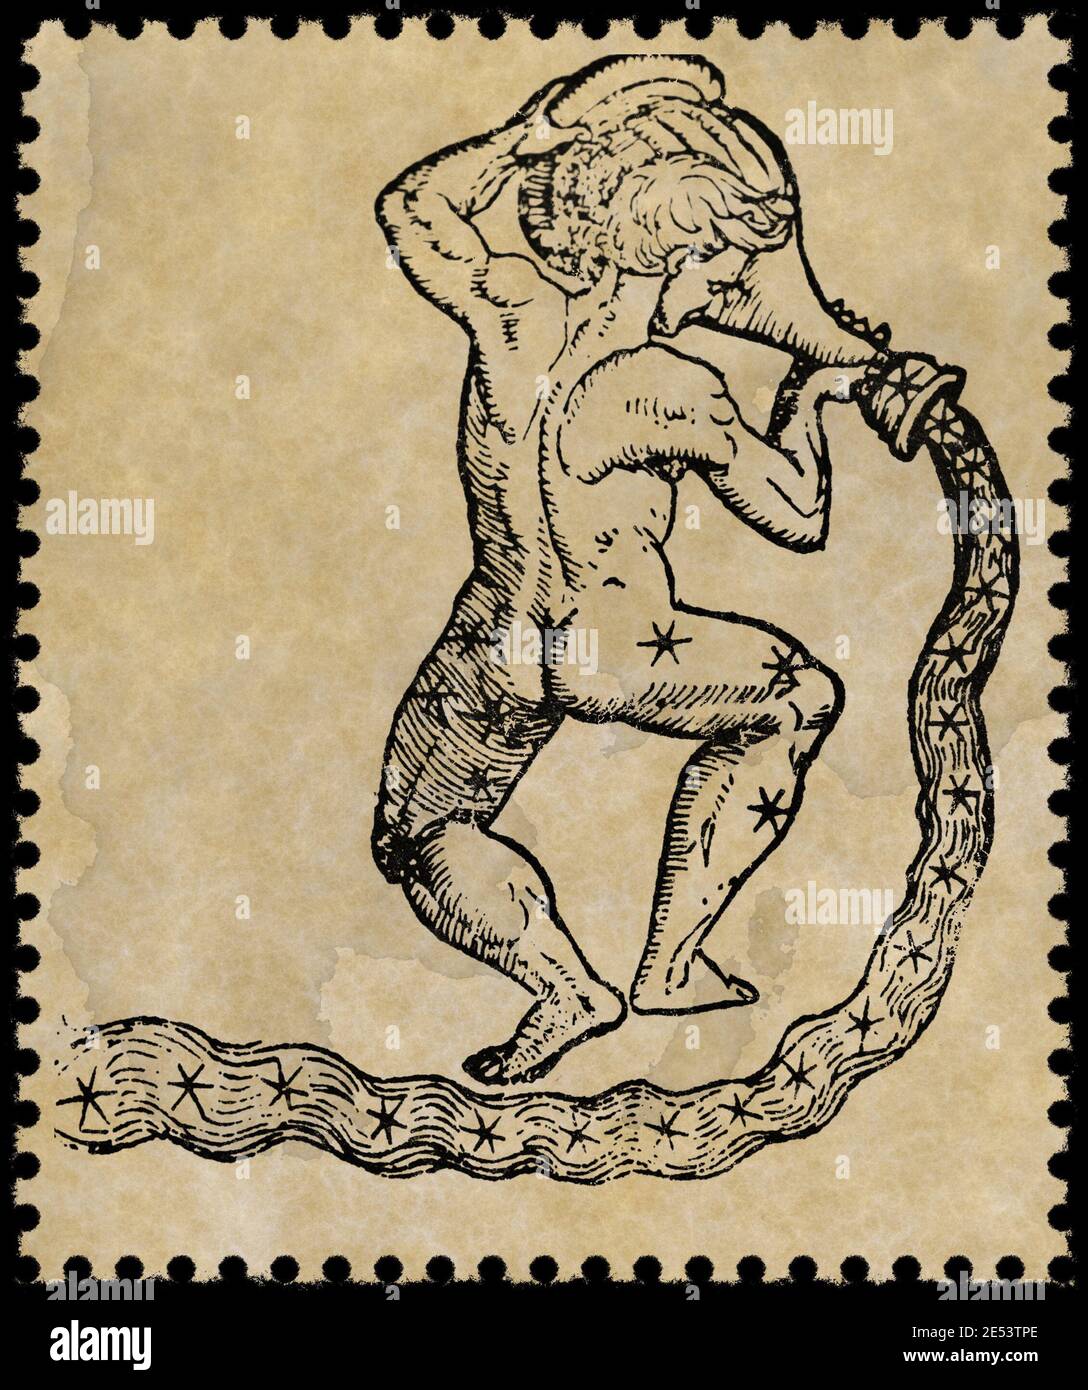 stamp with astrological symbols of the zodiac sign Aquarius Stock Photo